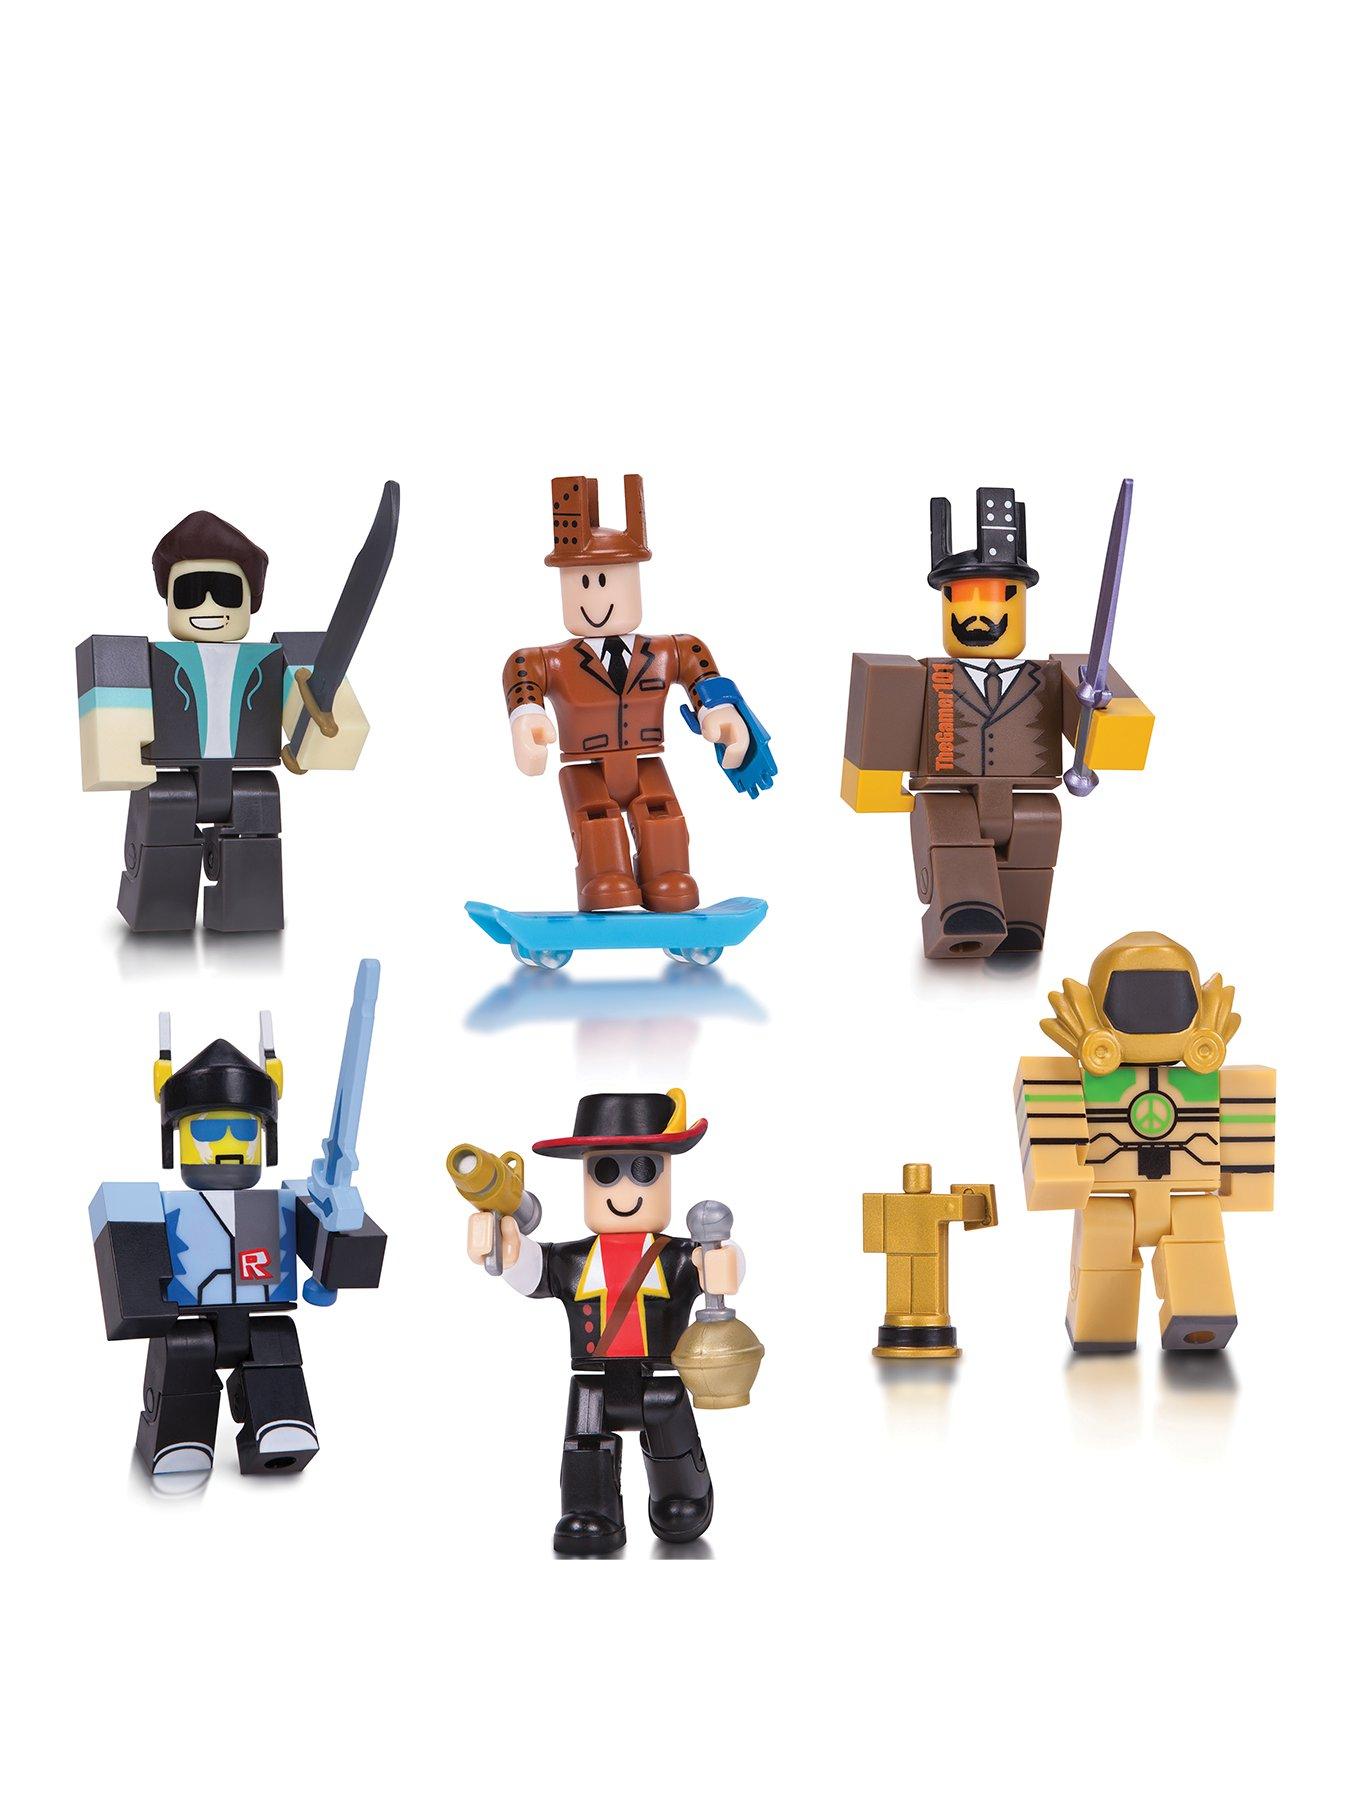 Roblox Offsale Packages Roblox Codes 2019 Tix Dominus - roblox offsale packages